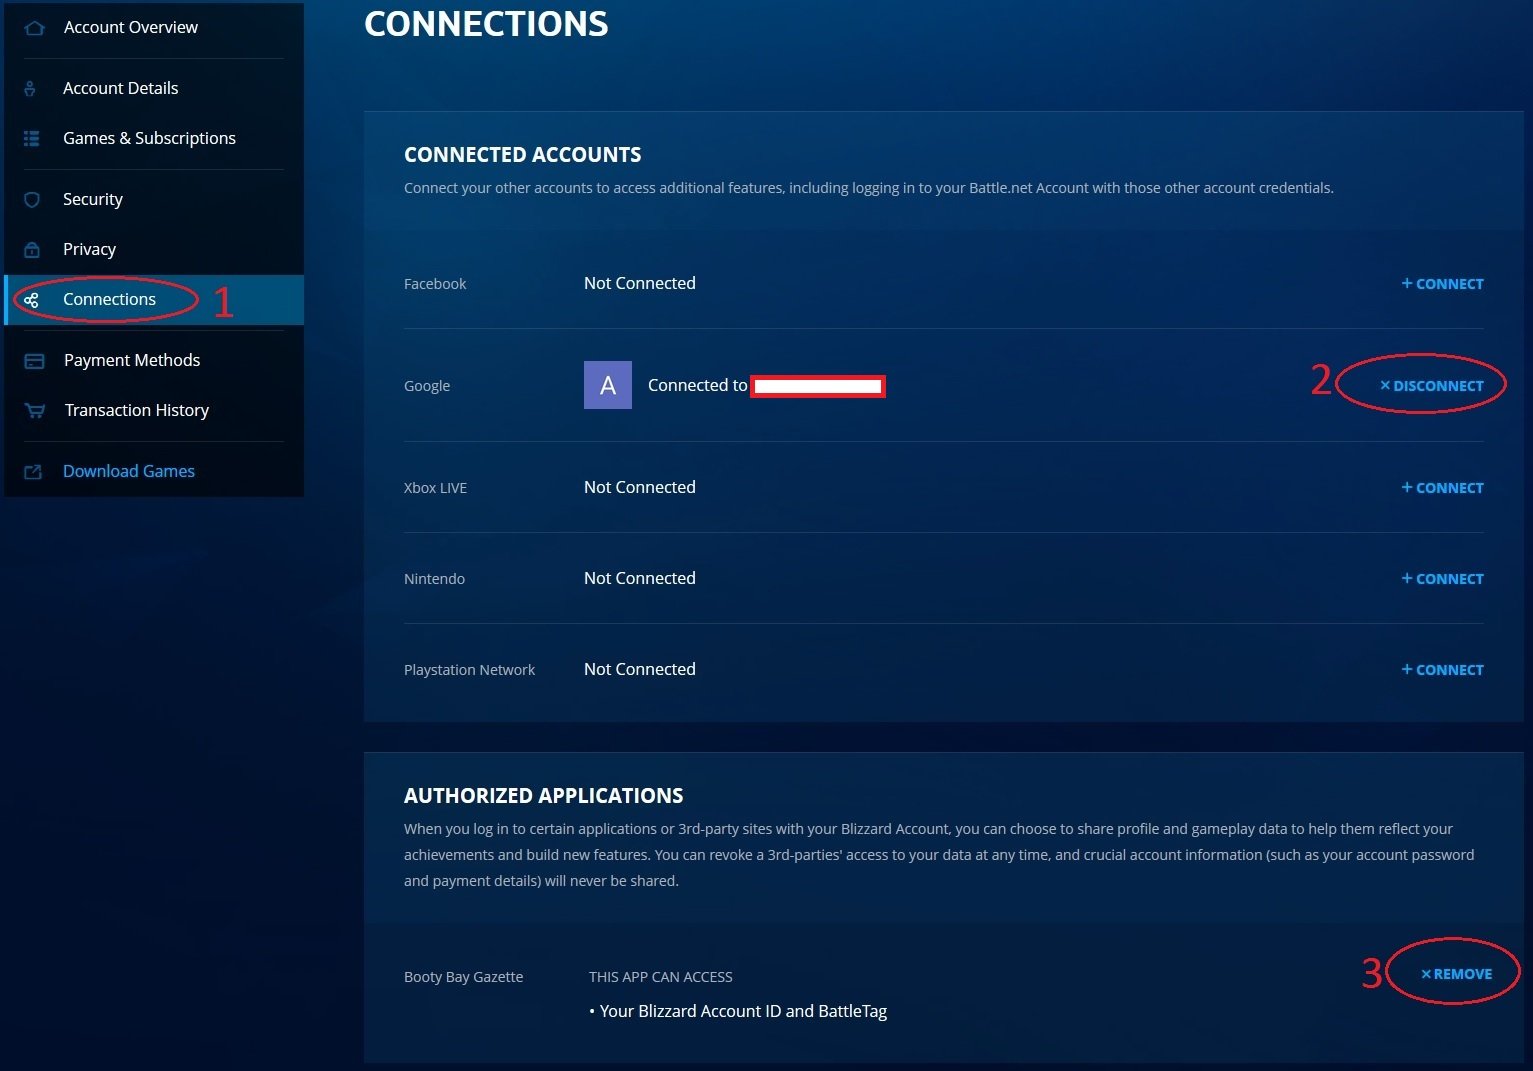 How to protect your Battle.net account